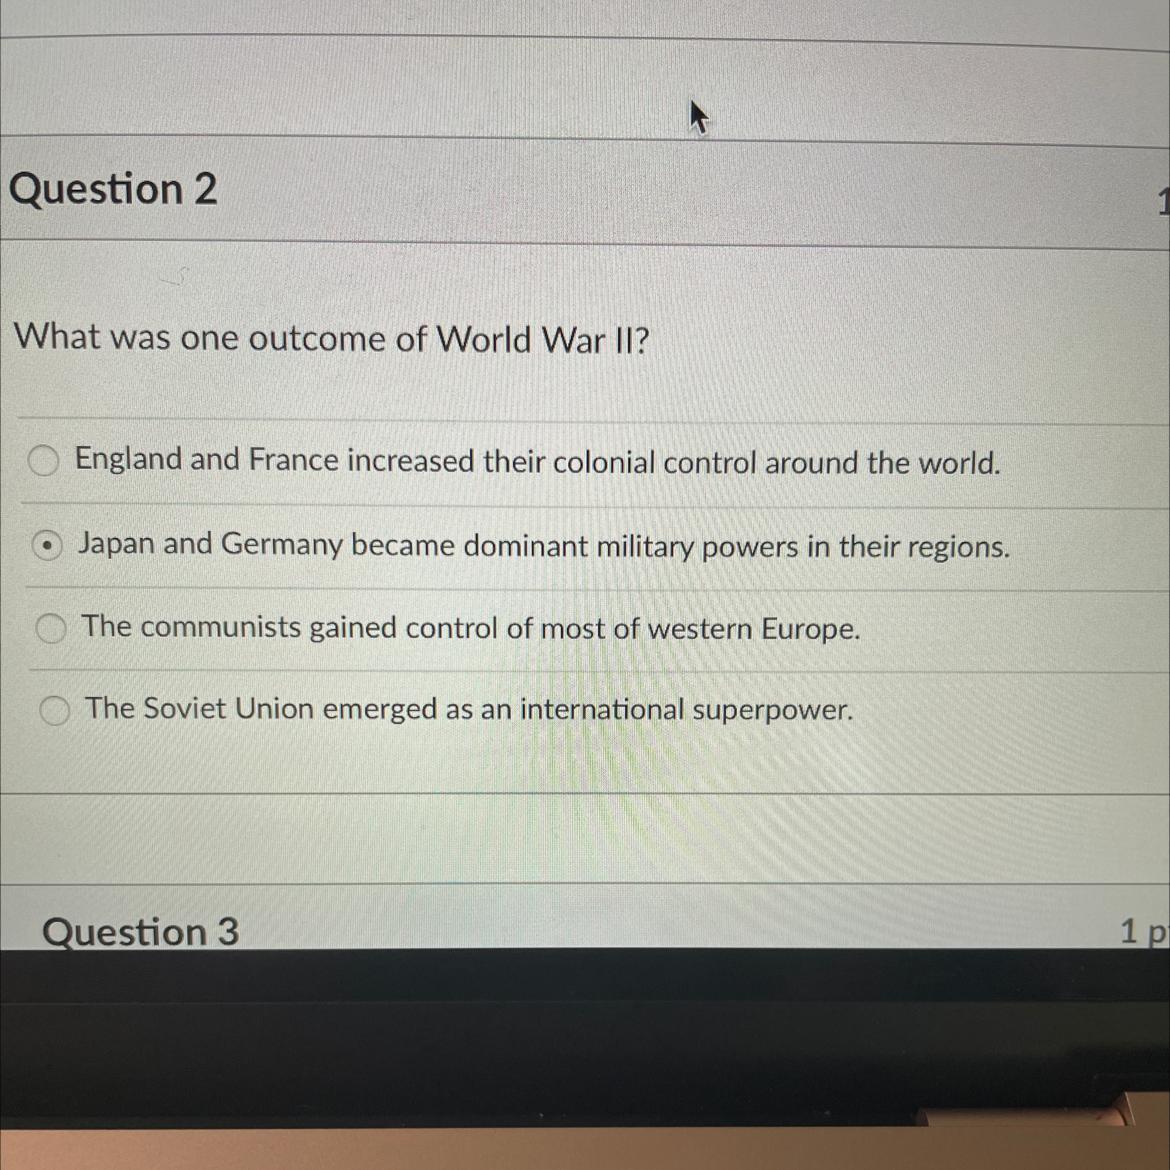 What Was One Outcome Of World War II?